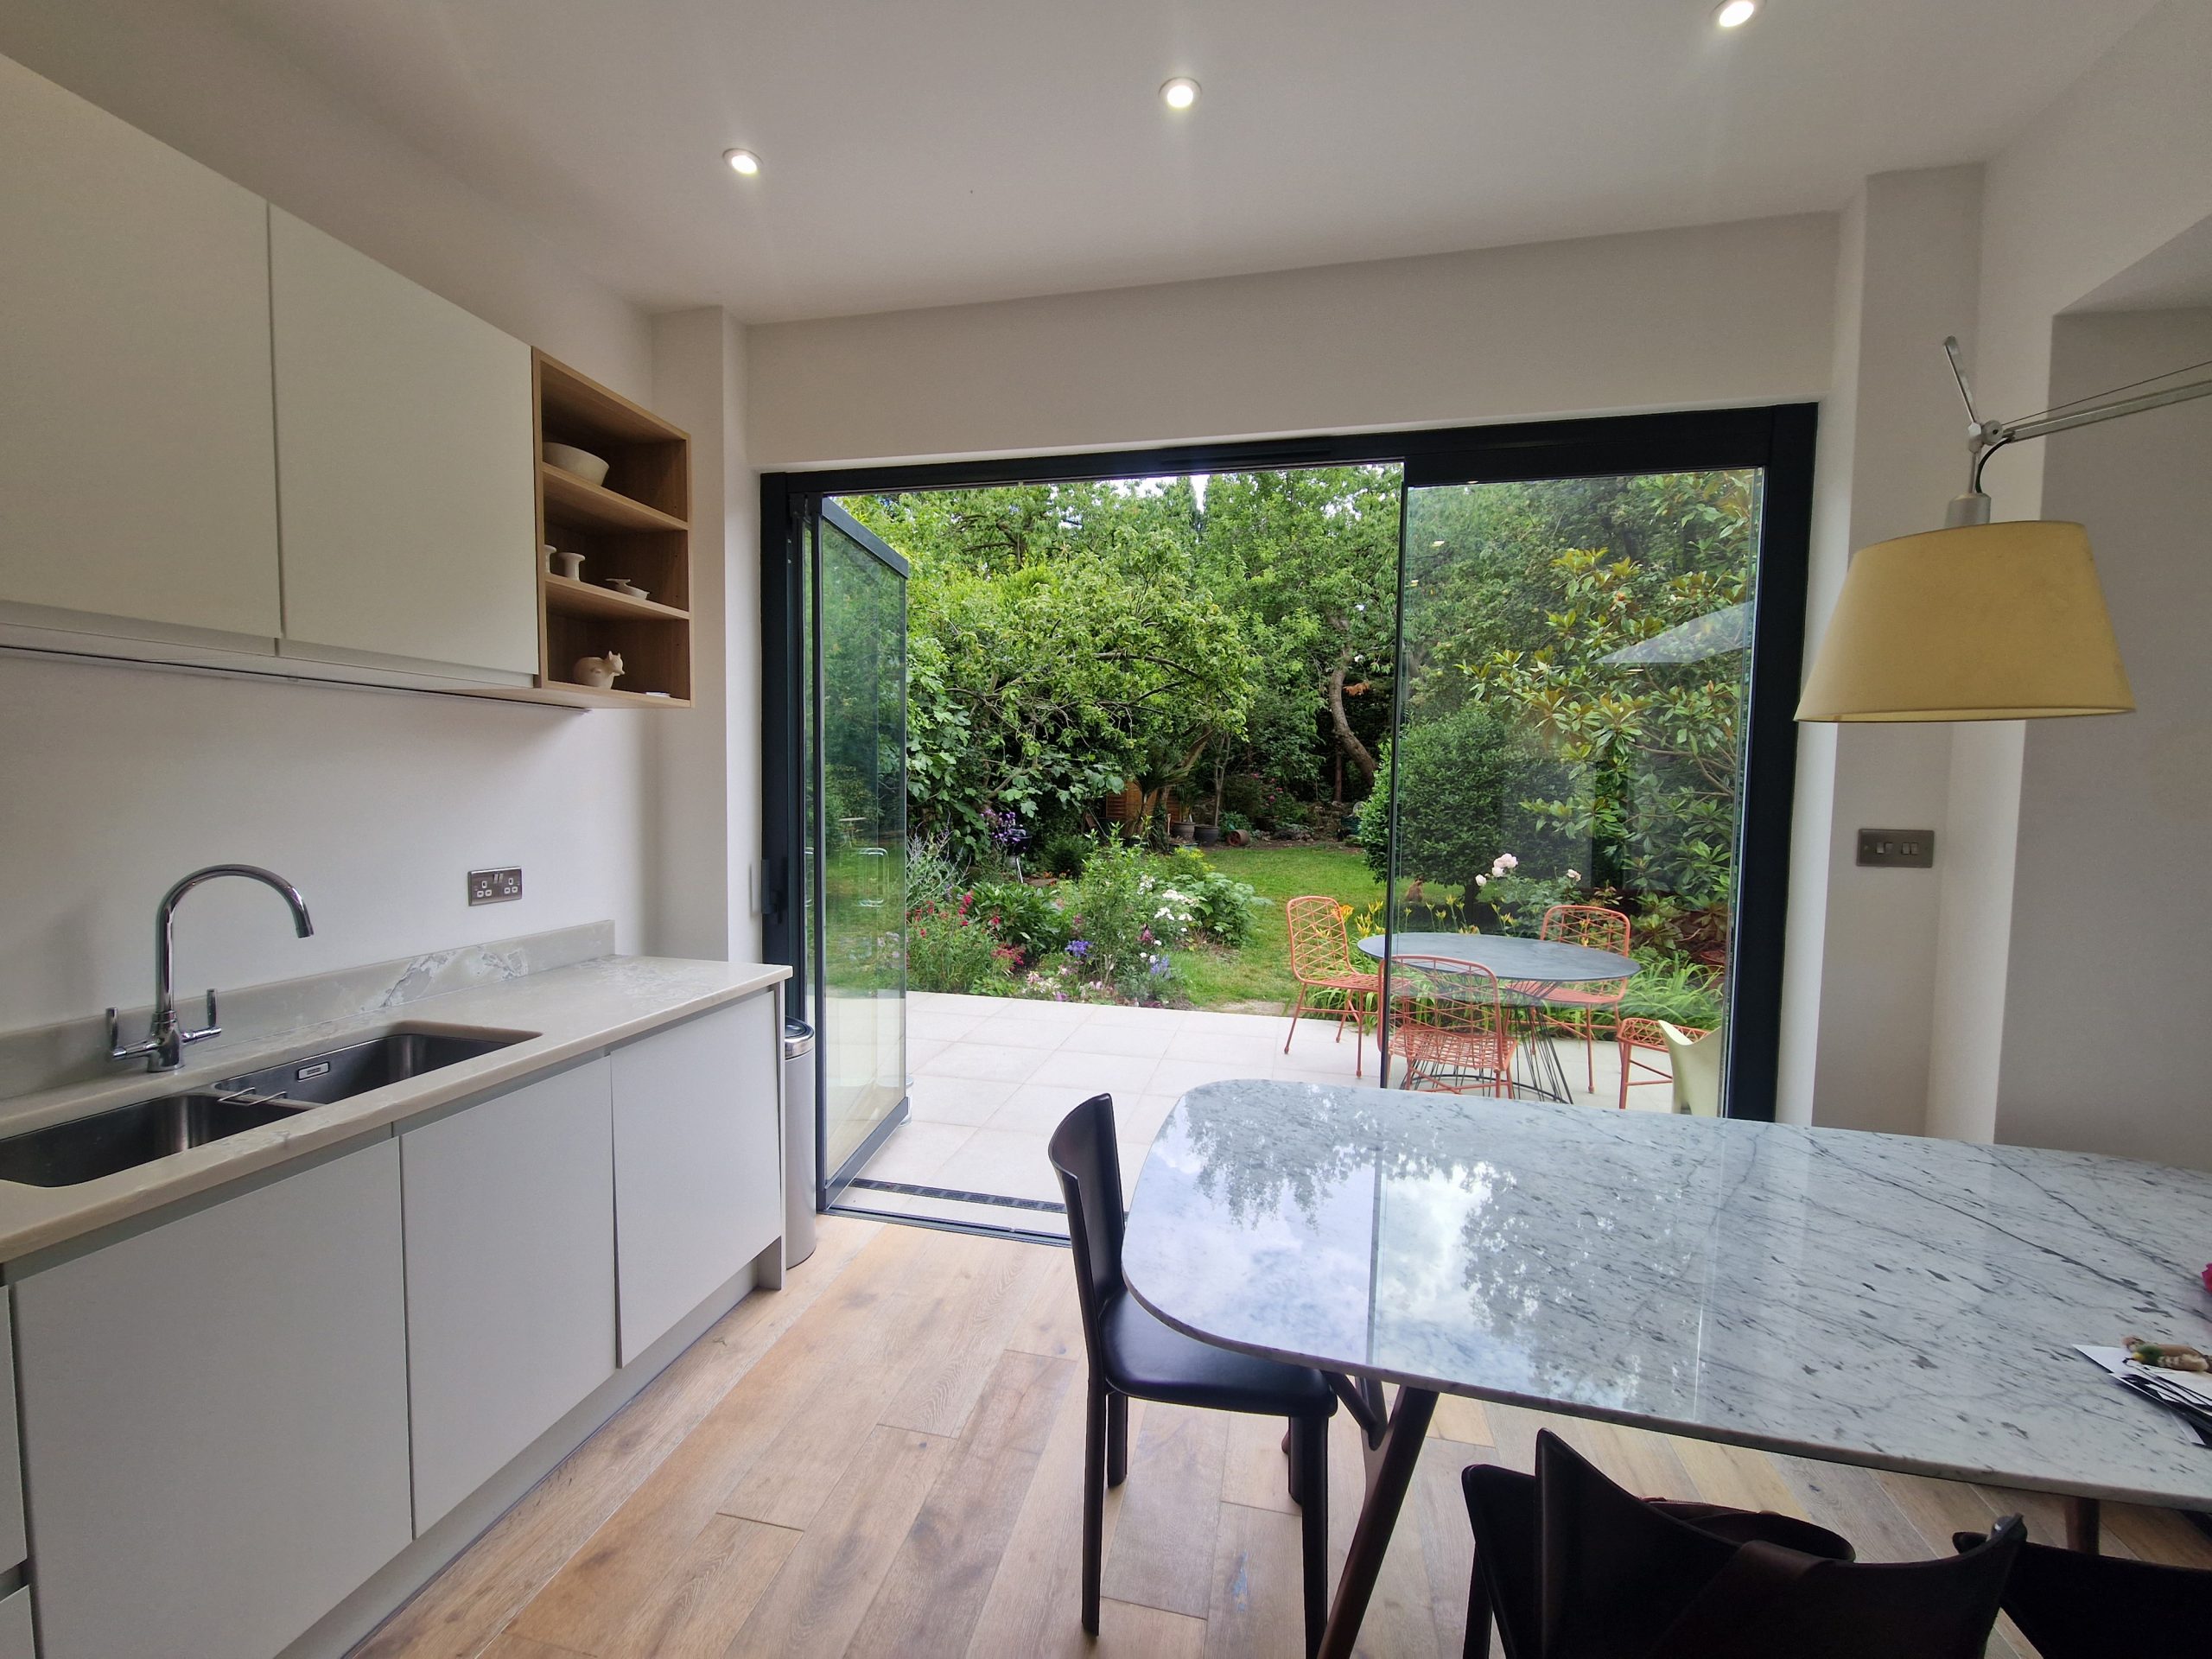 Freshly renovated kitchen and dining room by Combit Construction, award winning North London builders